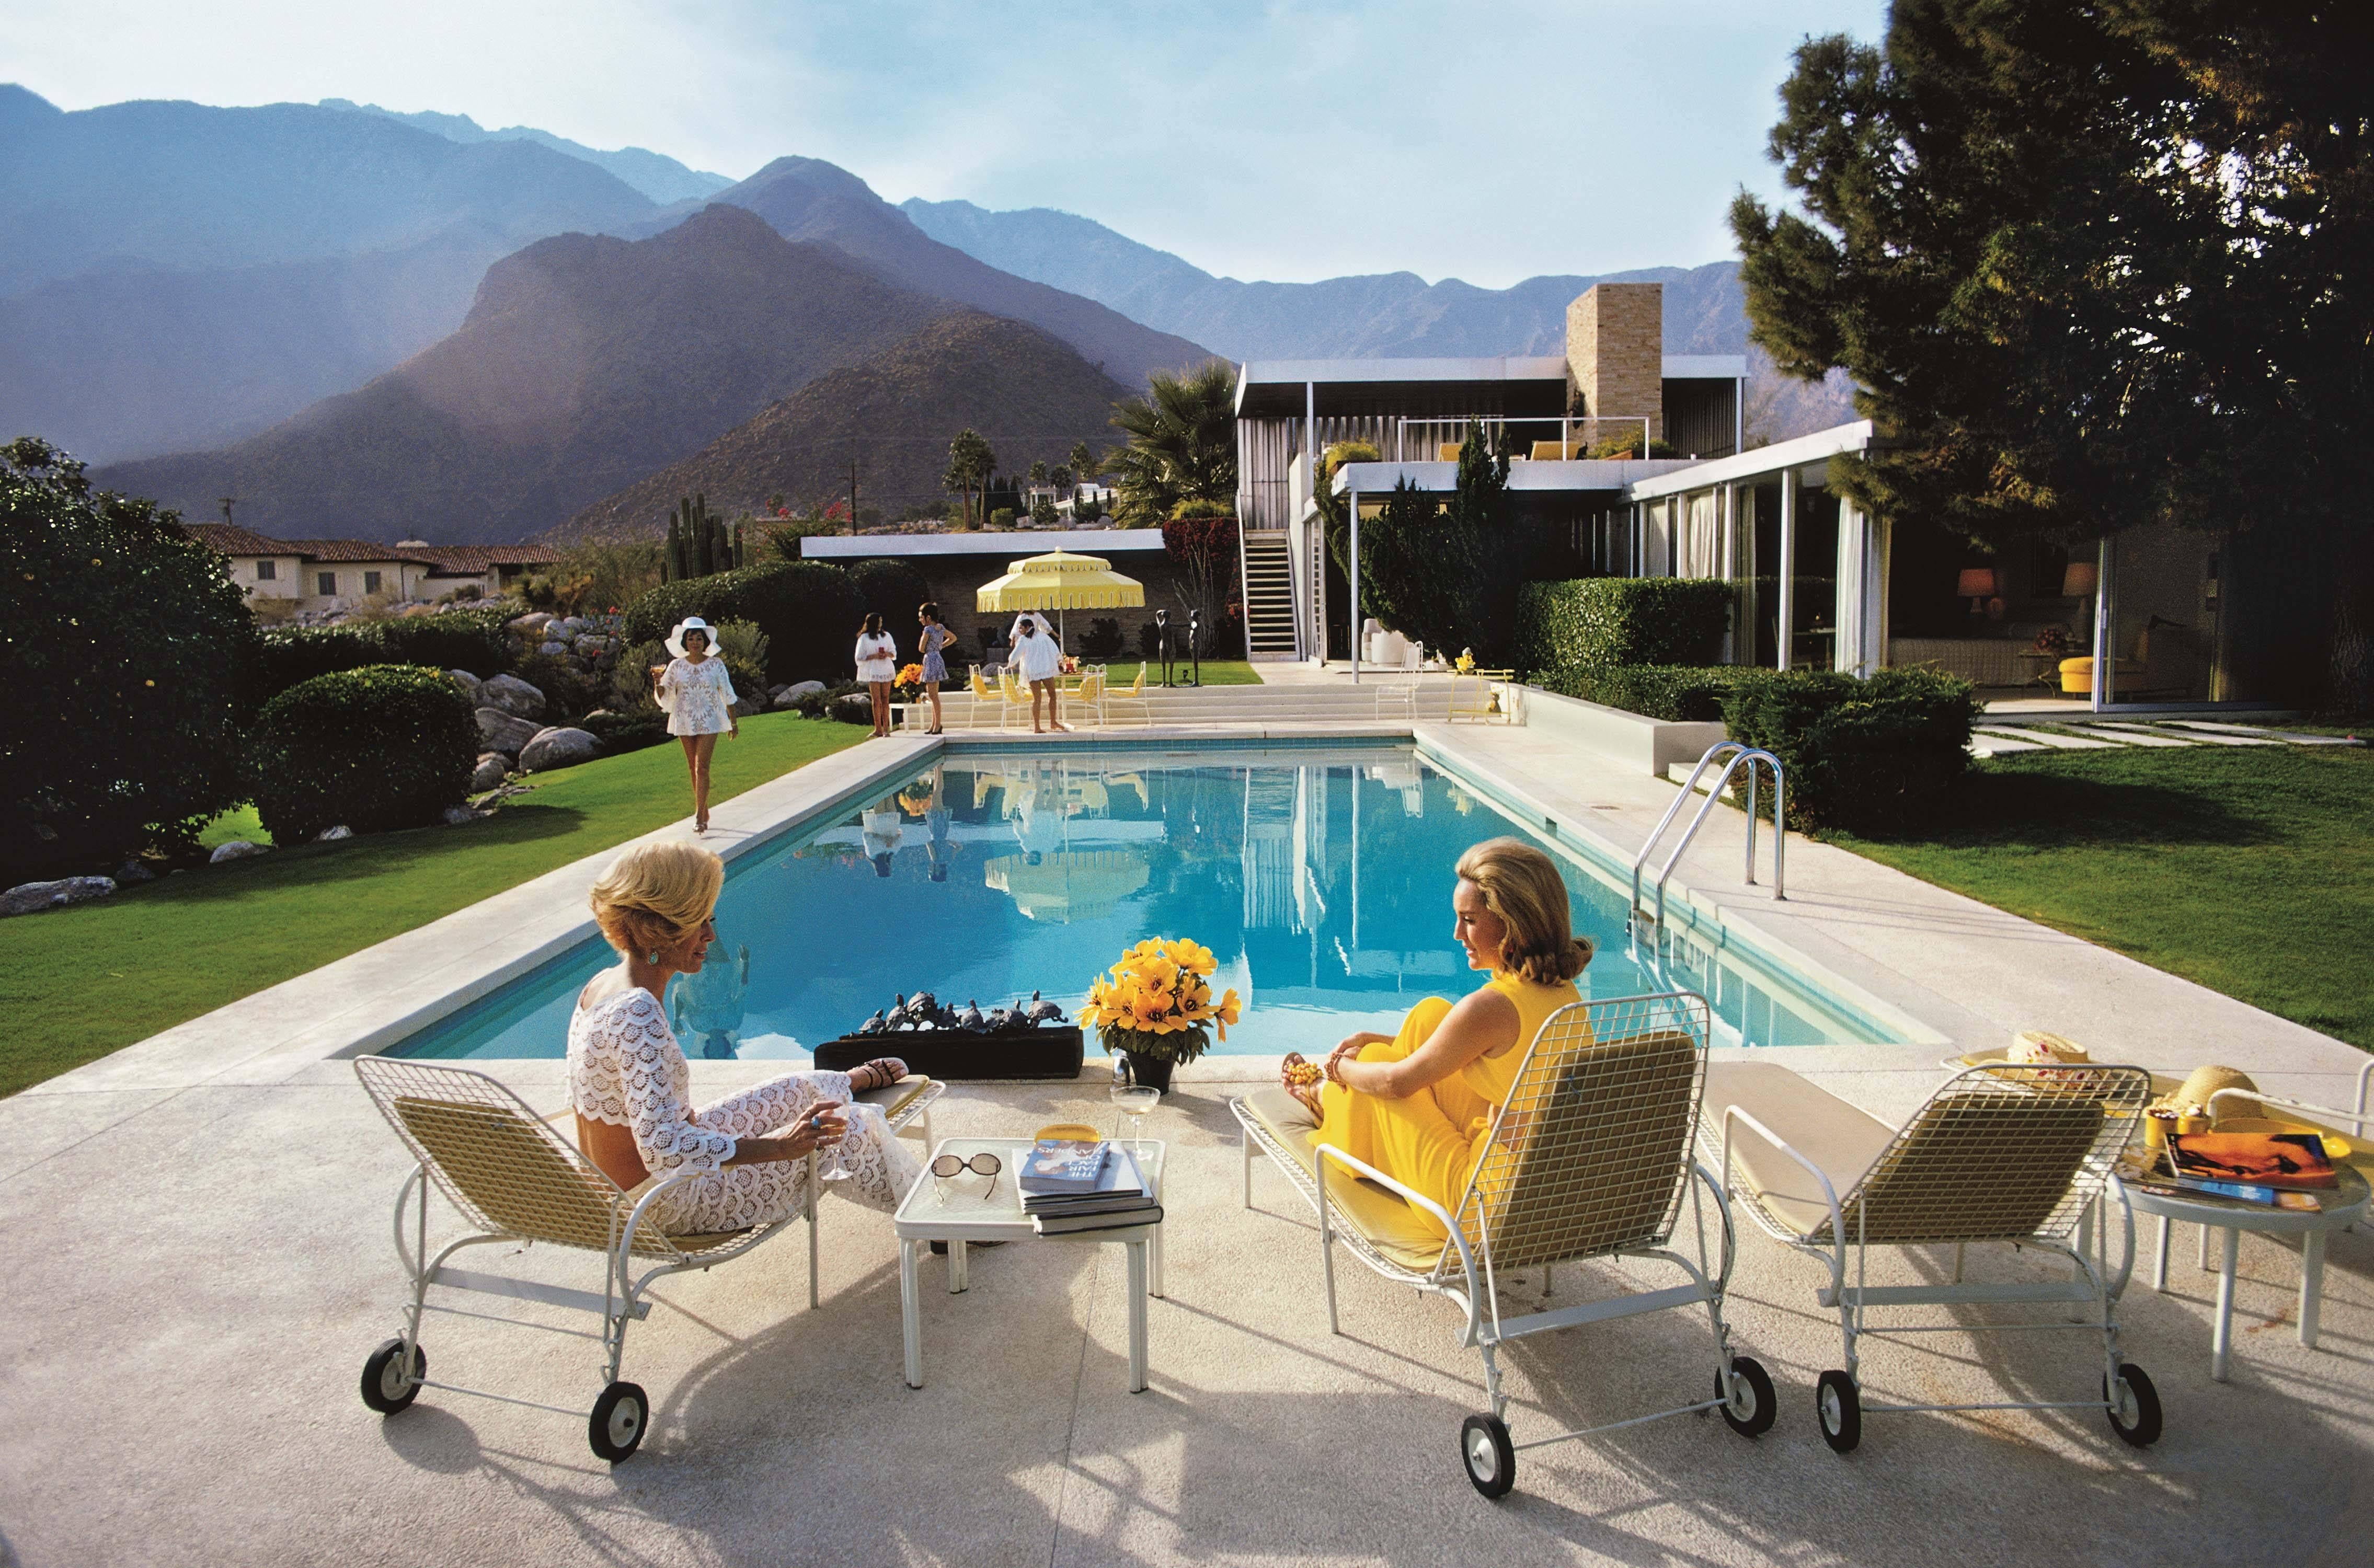 A desert house in Palm Springs designed by Richard Neutra for Edgar Kaufman. Lita Baron approaches Nelda Linsk, right, wife of art dealer Joseph Linsk who is talking to a friend, Helen Dzo Dzo.  

40 x 60 inches
$7020

30 x 40 inches
$5460

20 x 30